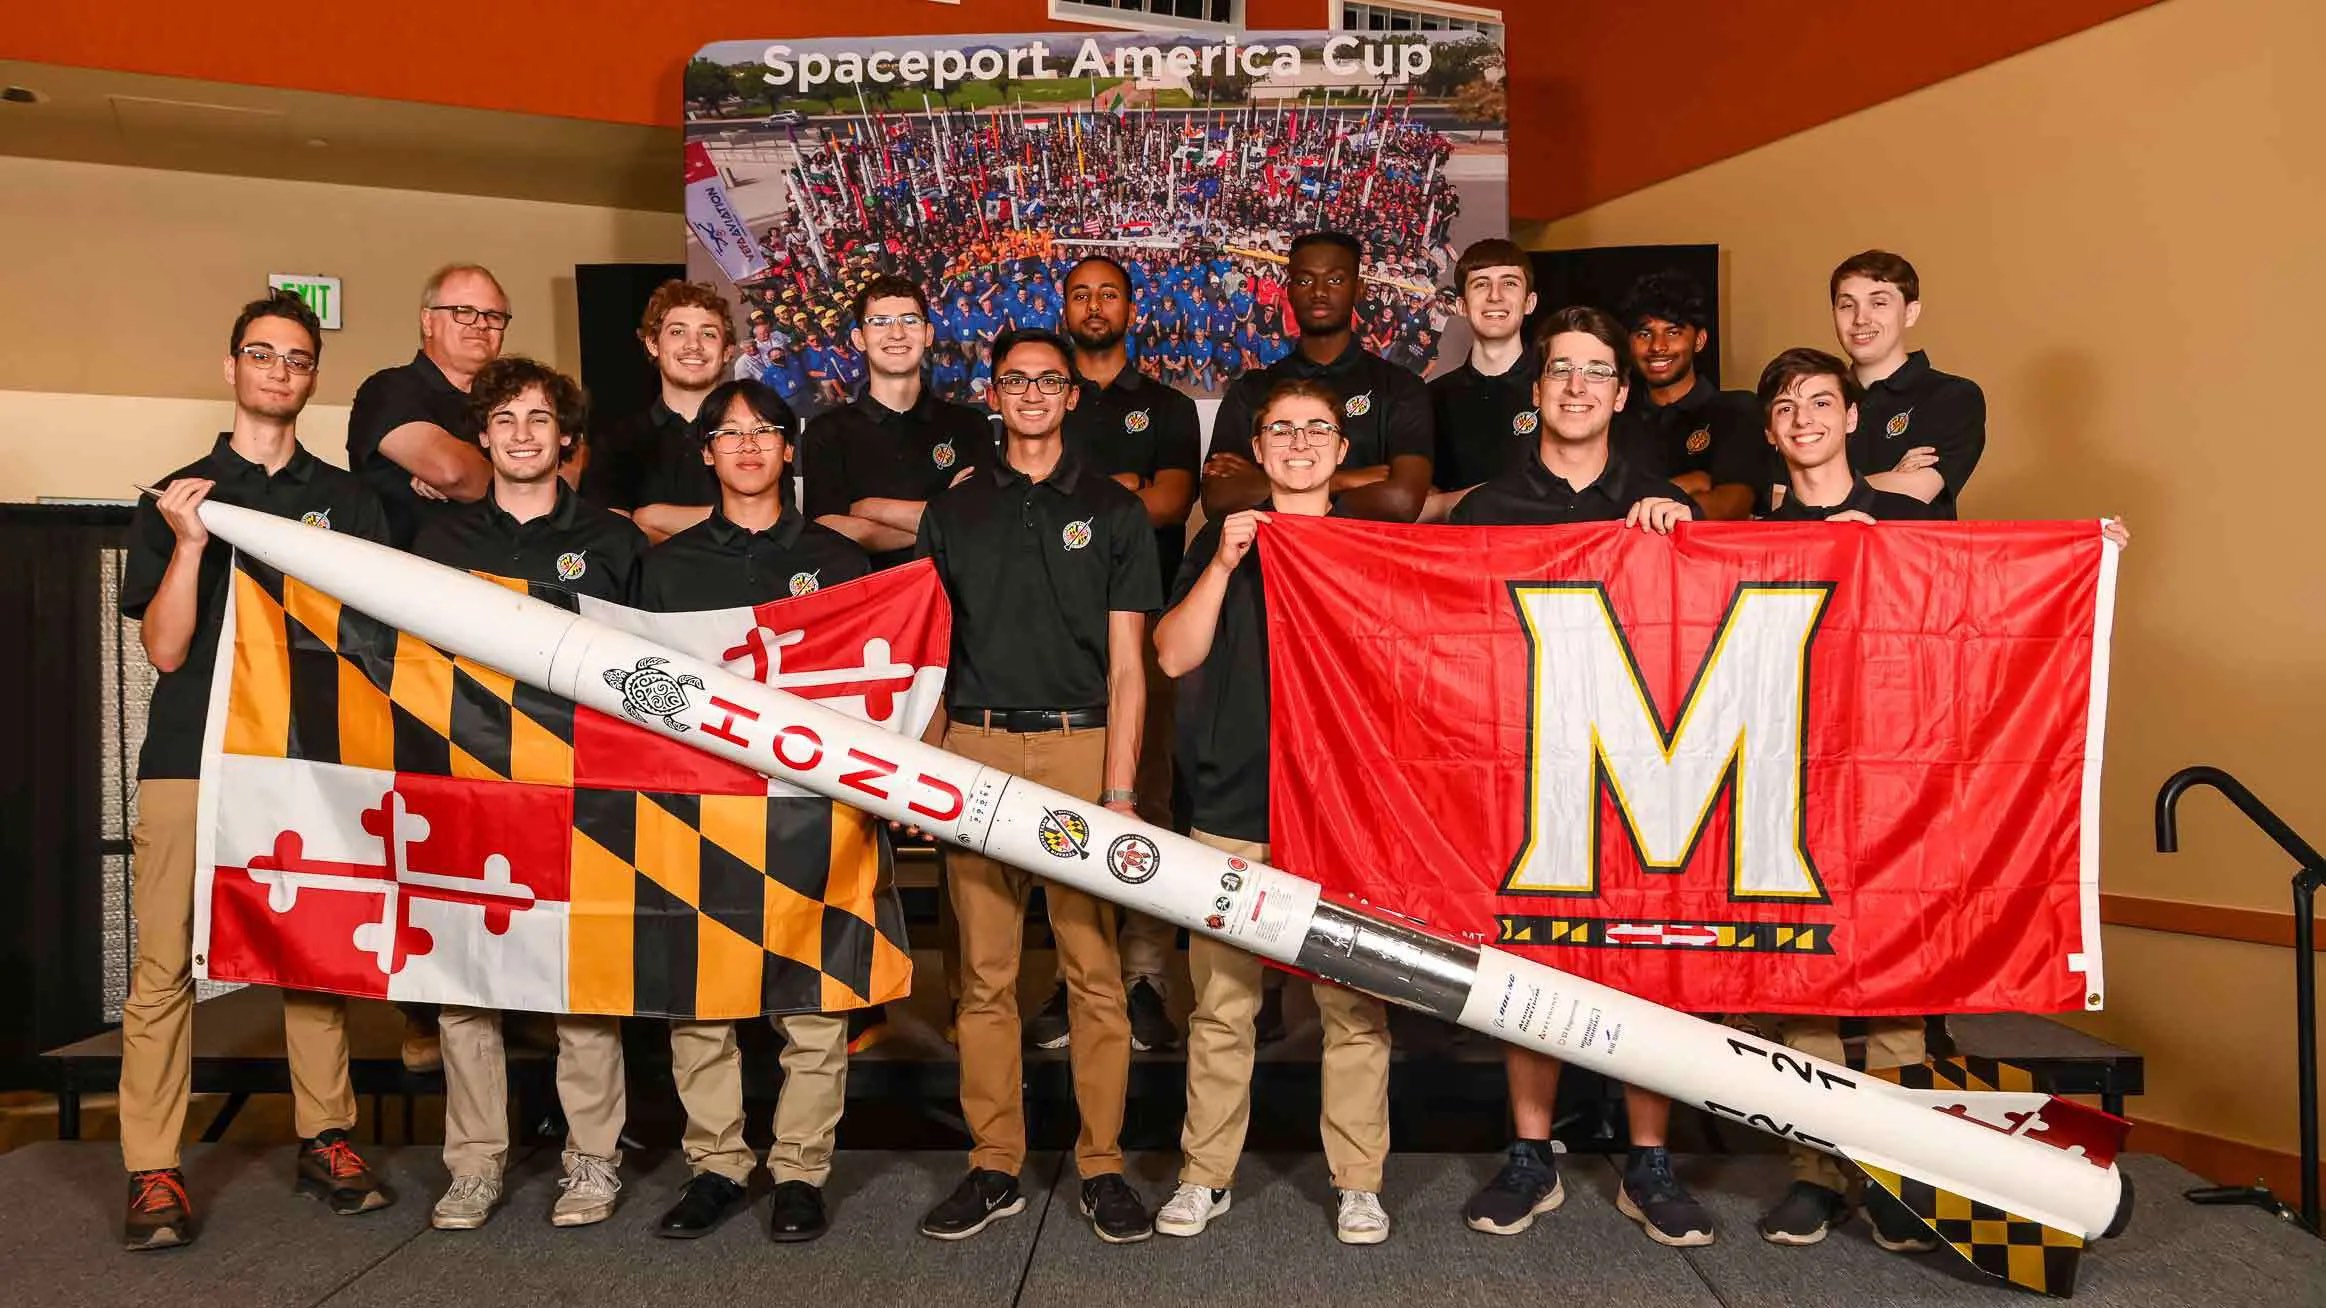 The Terrapin Rocket Team poses for a photo at the Spaceport America Cup. Photo by Jim Wilkerson